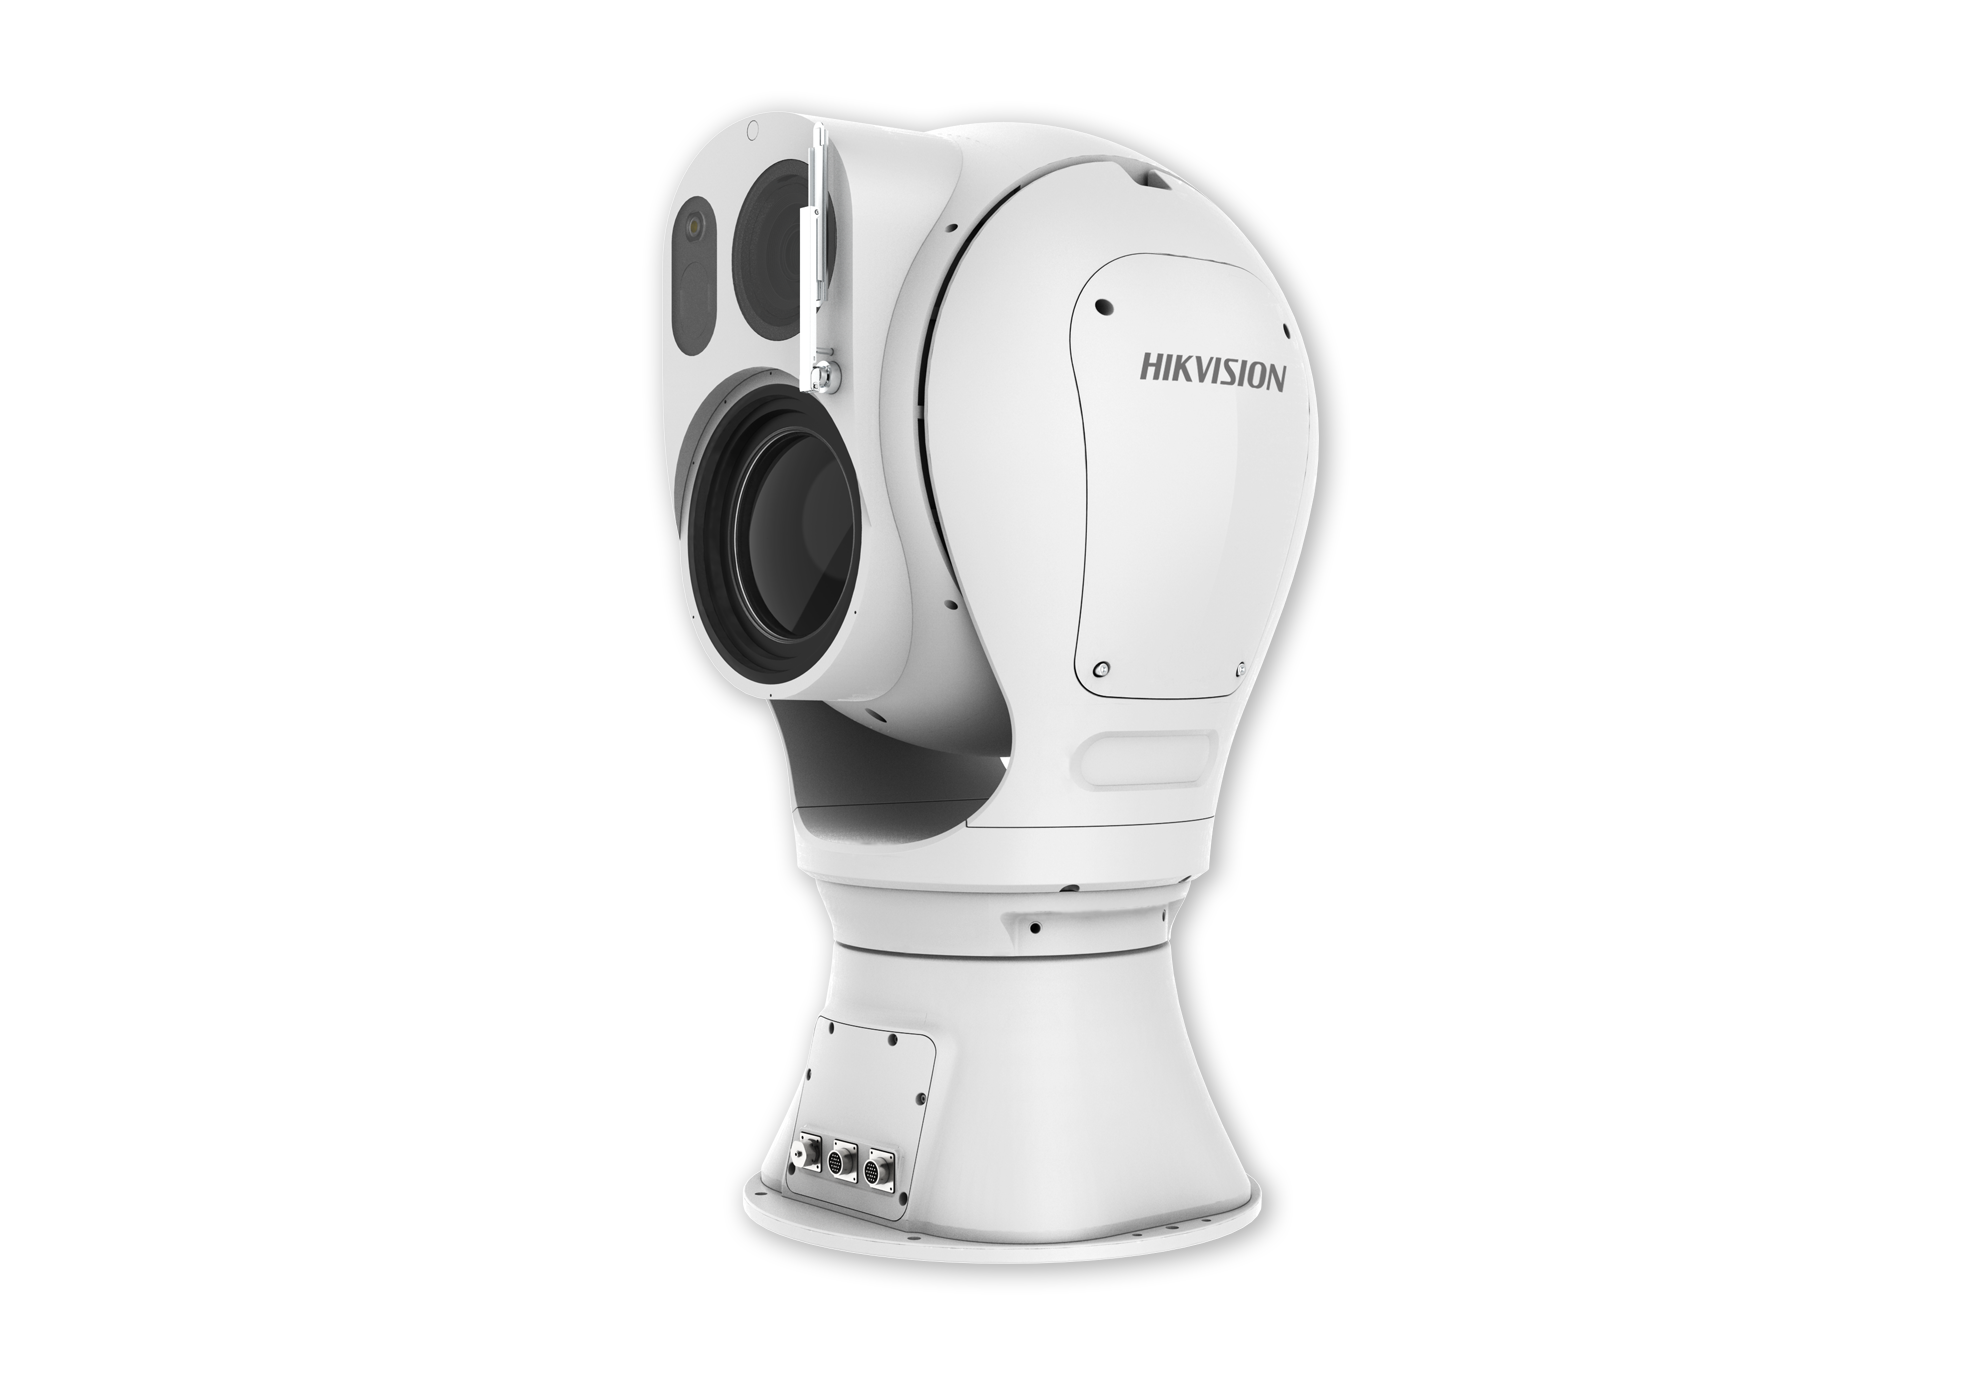 This picture shows a thermal camera by HikVision